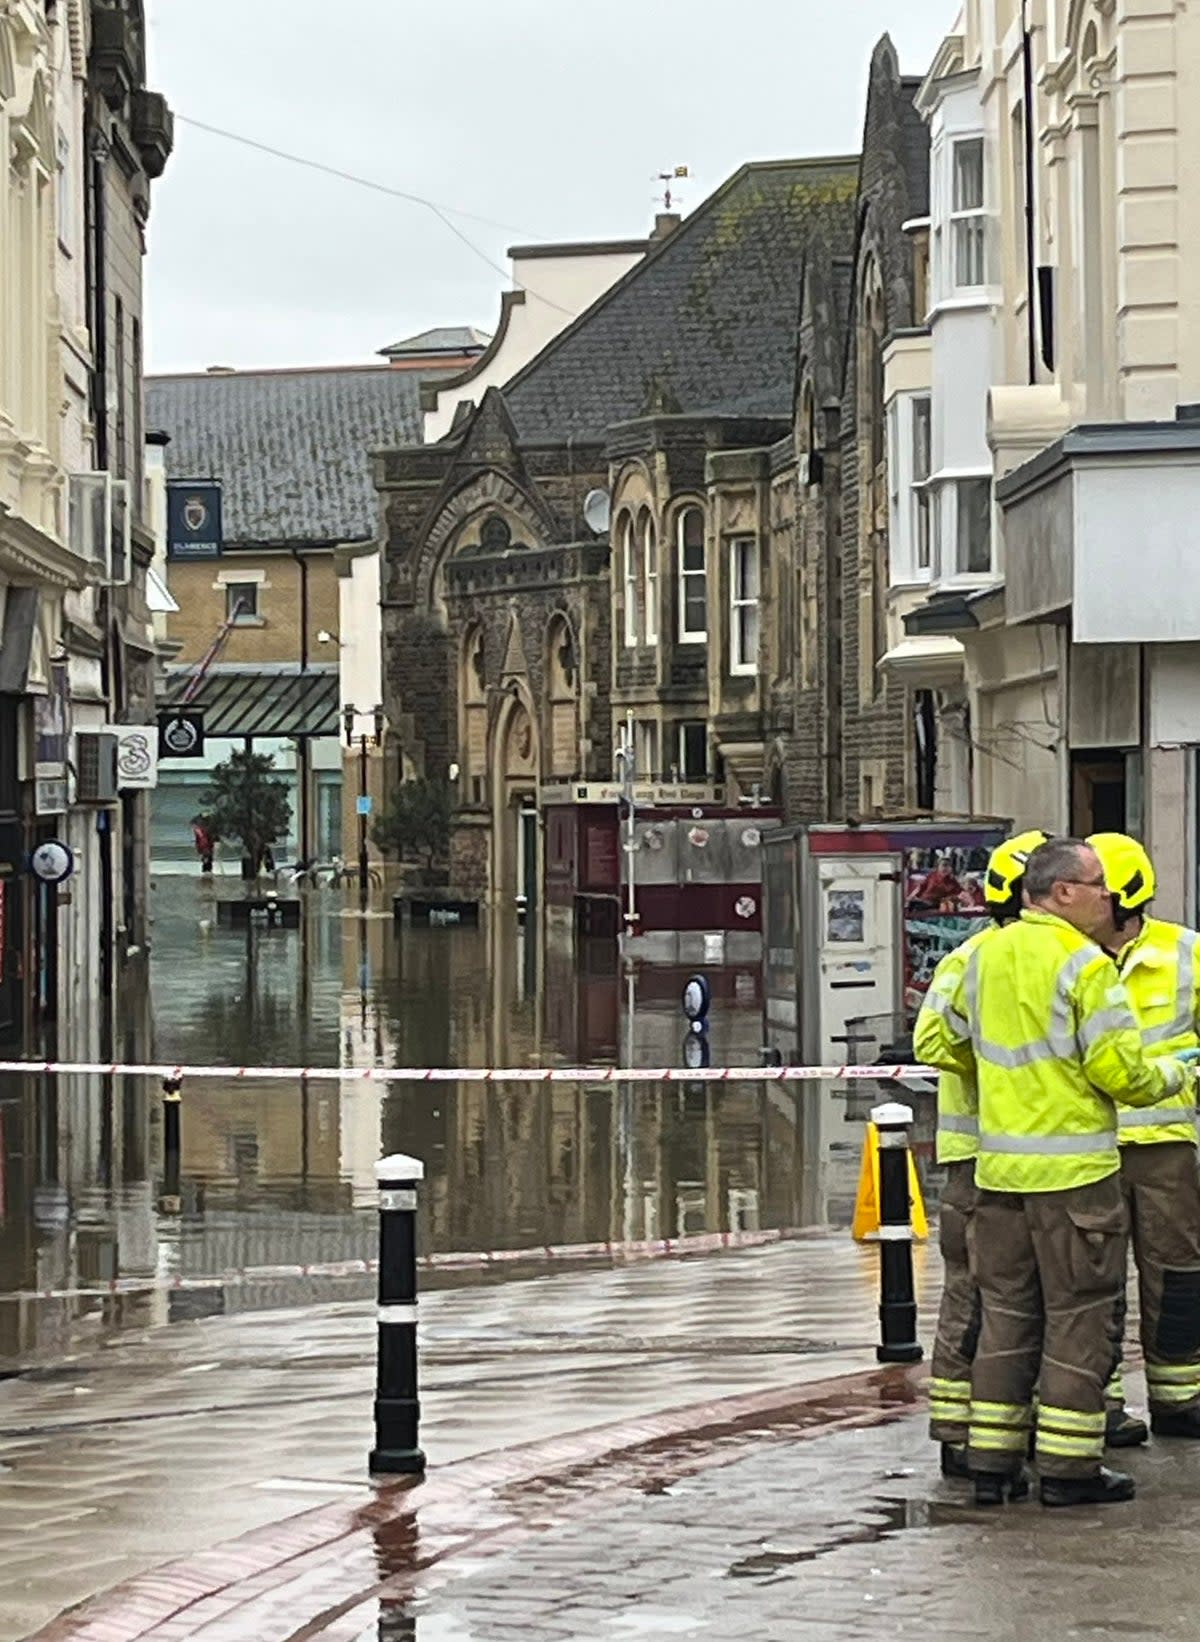 Emergency services were called in to deal with the flooding in Hastings (PA)